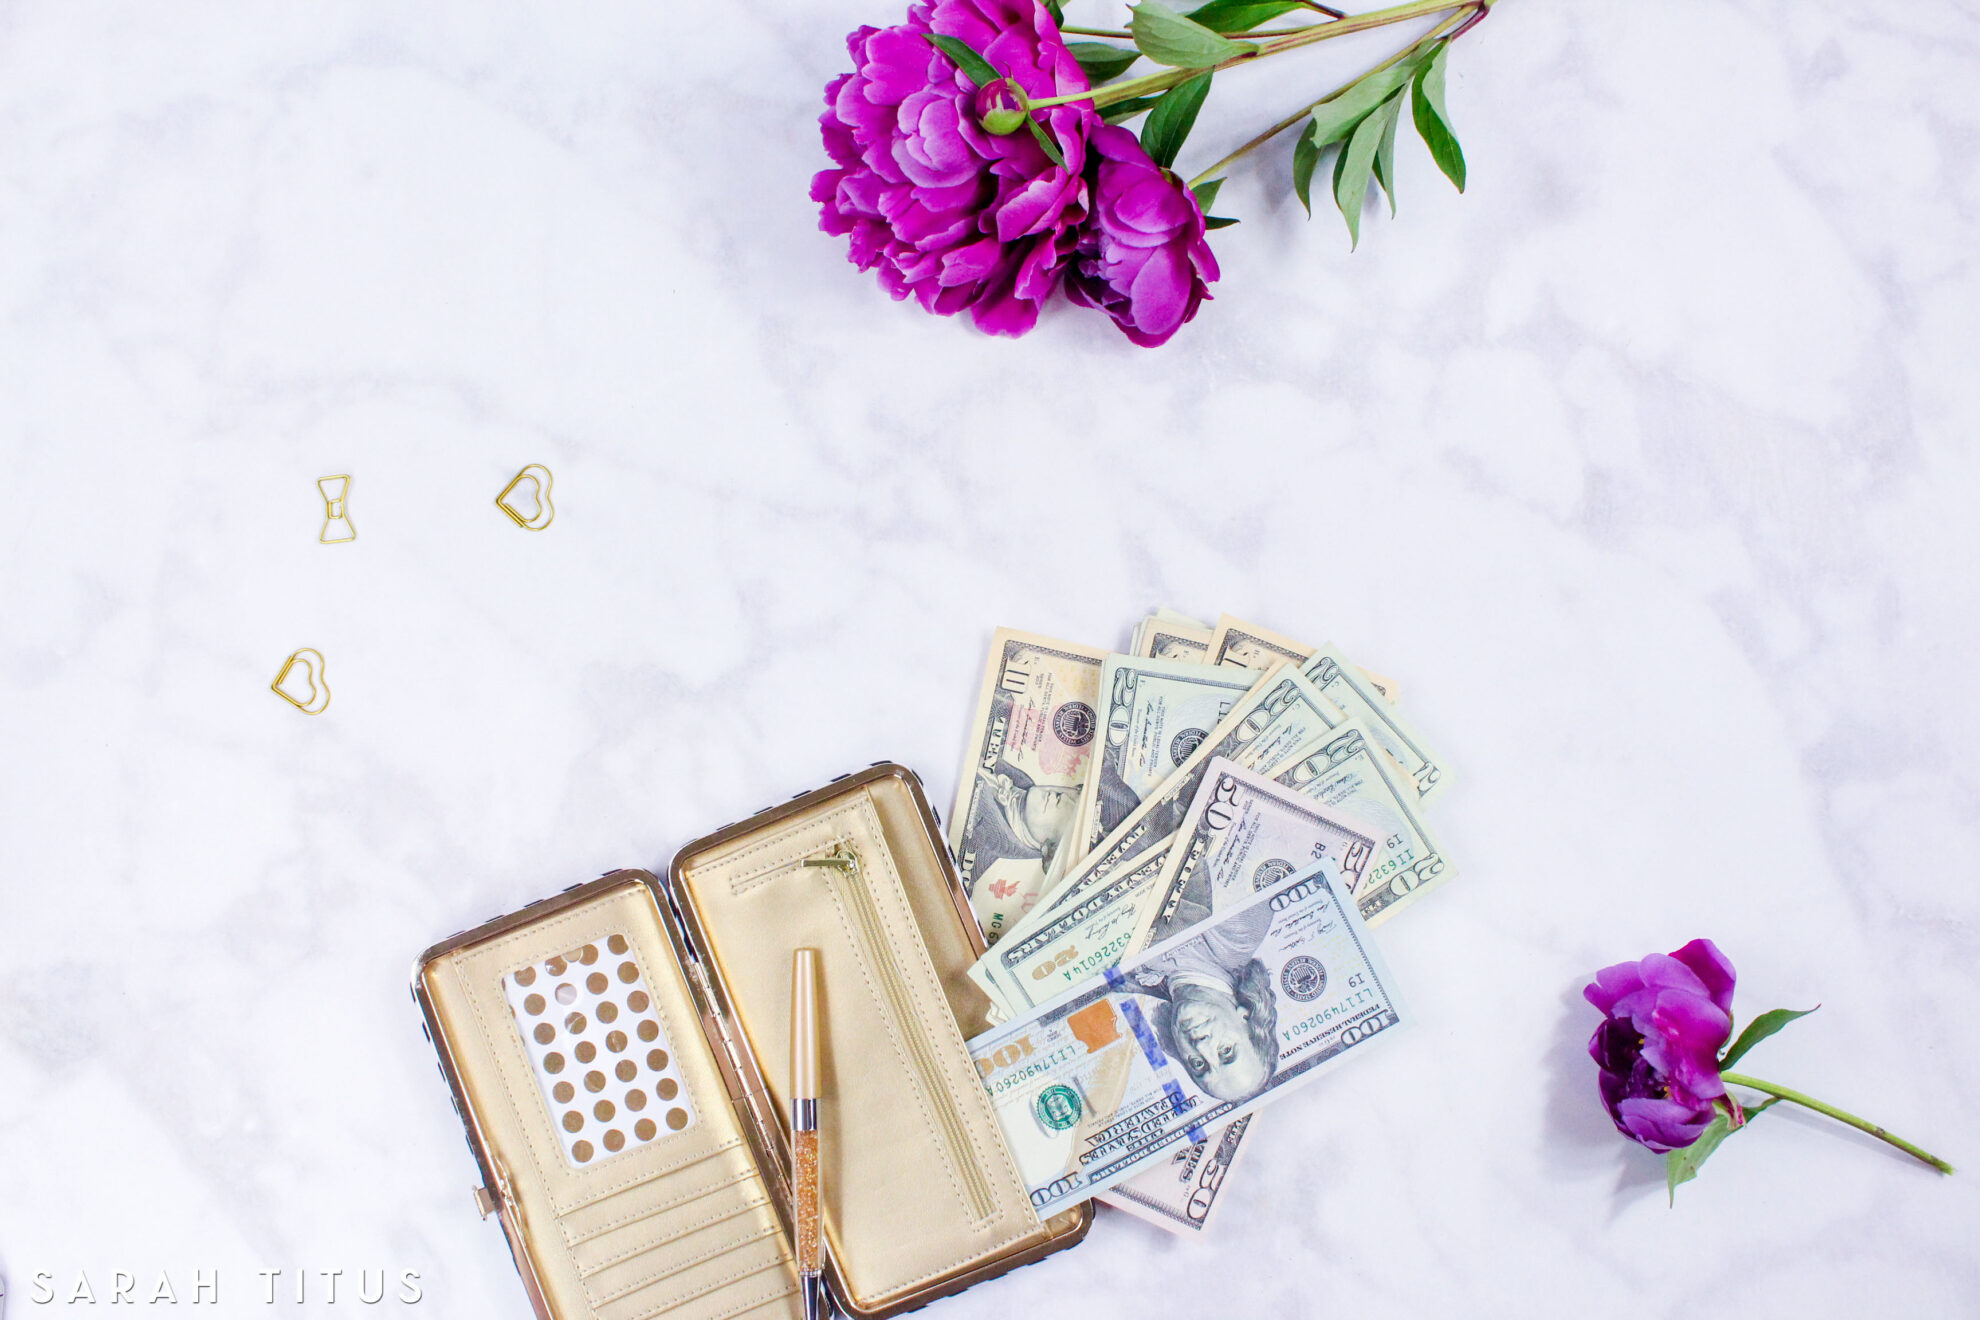 As a writer who was published in a national book 20+ years ago and has been writing ever since, I've had the privilege of getting to know the myriad of ways in which to earn income from writing. Here's your complete guide to writing for profit!